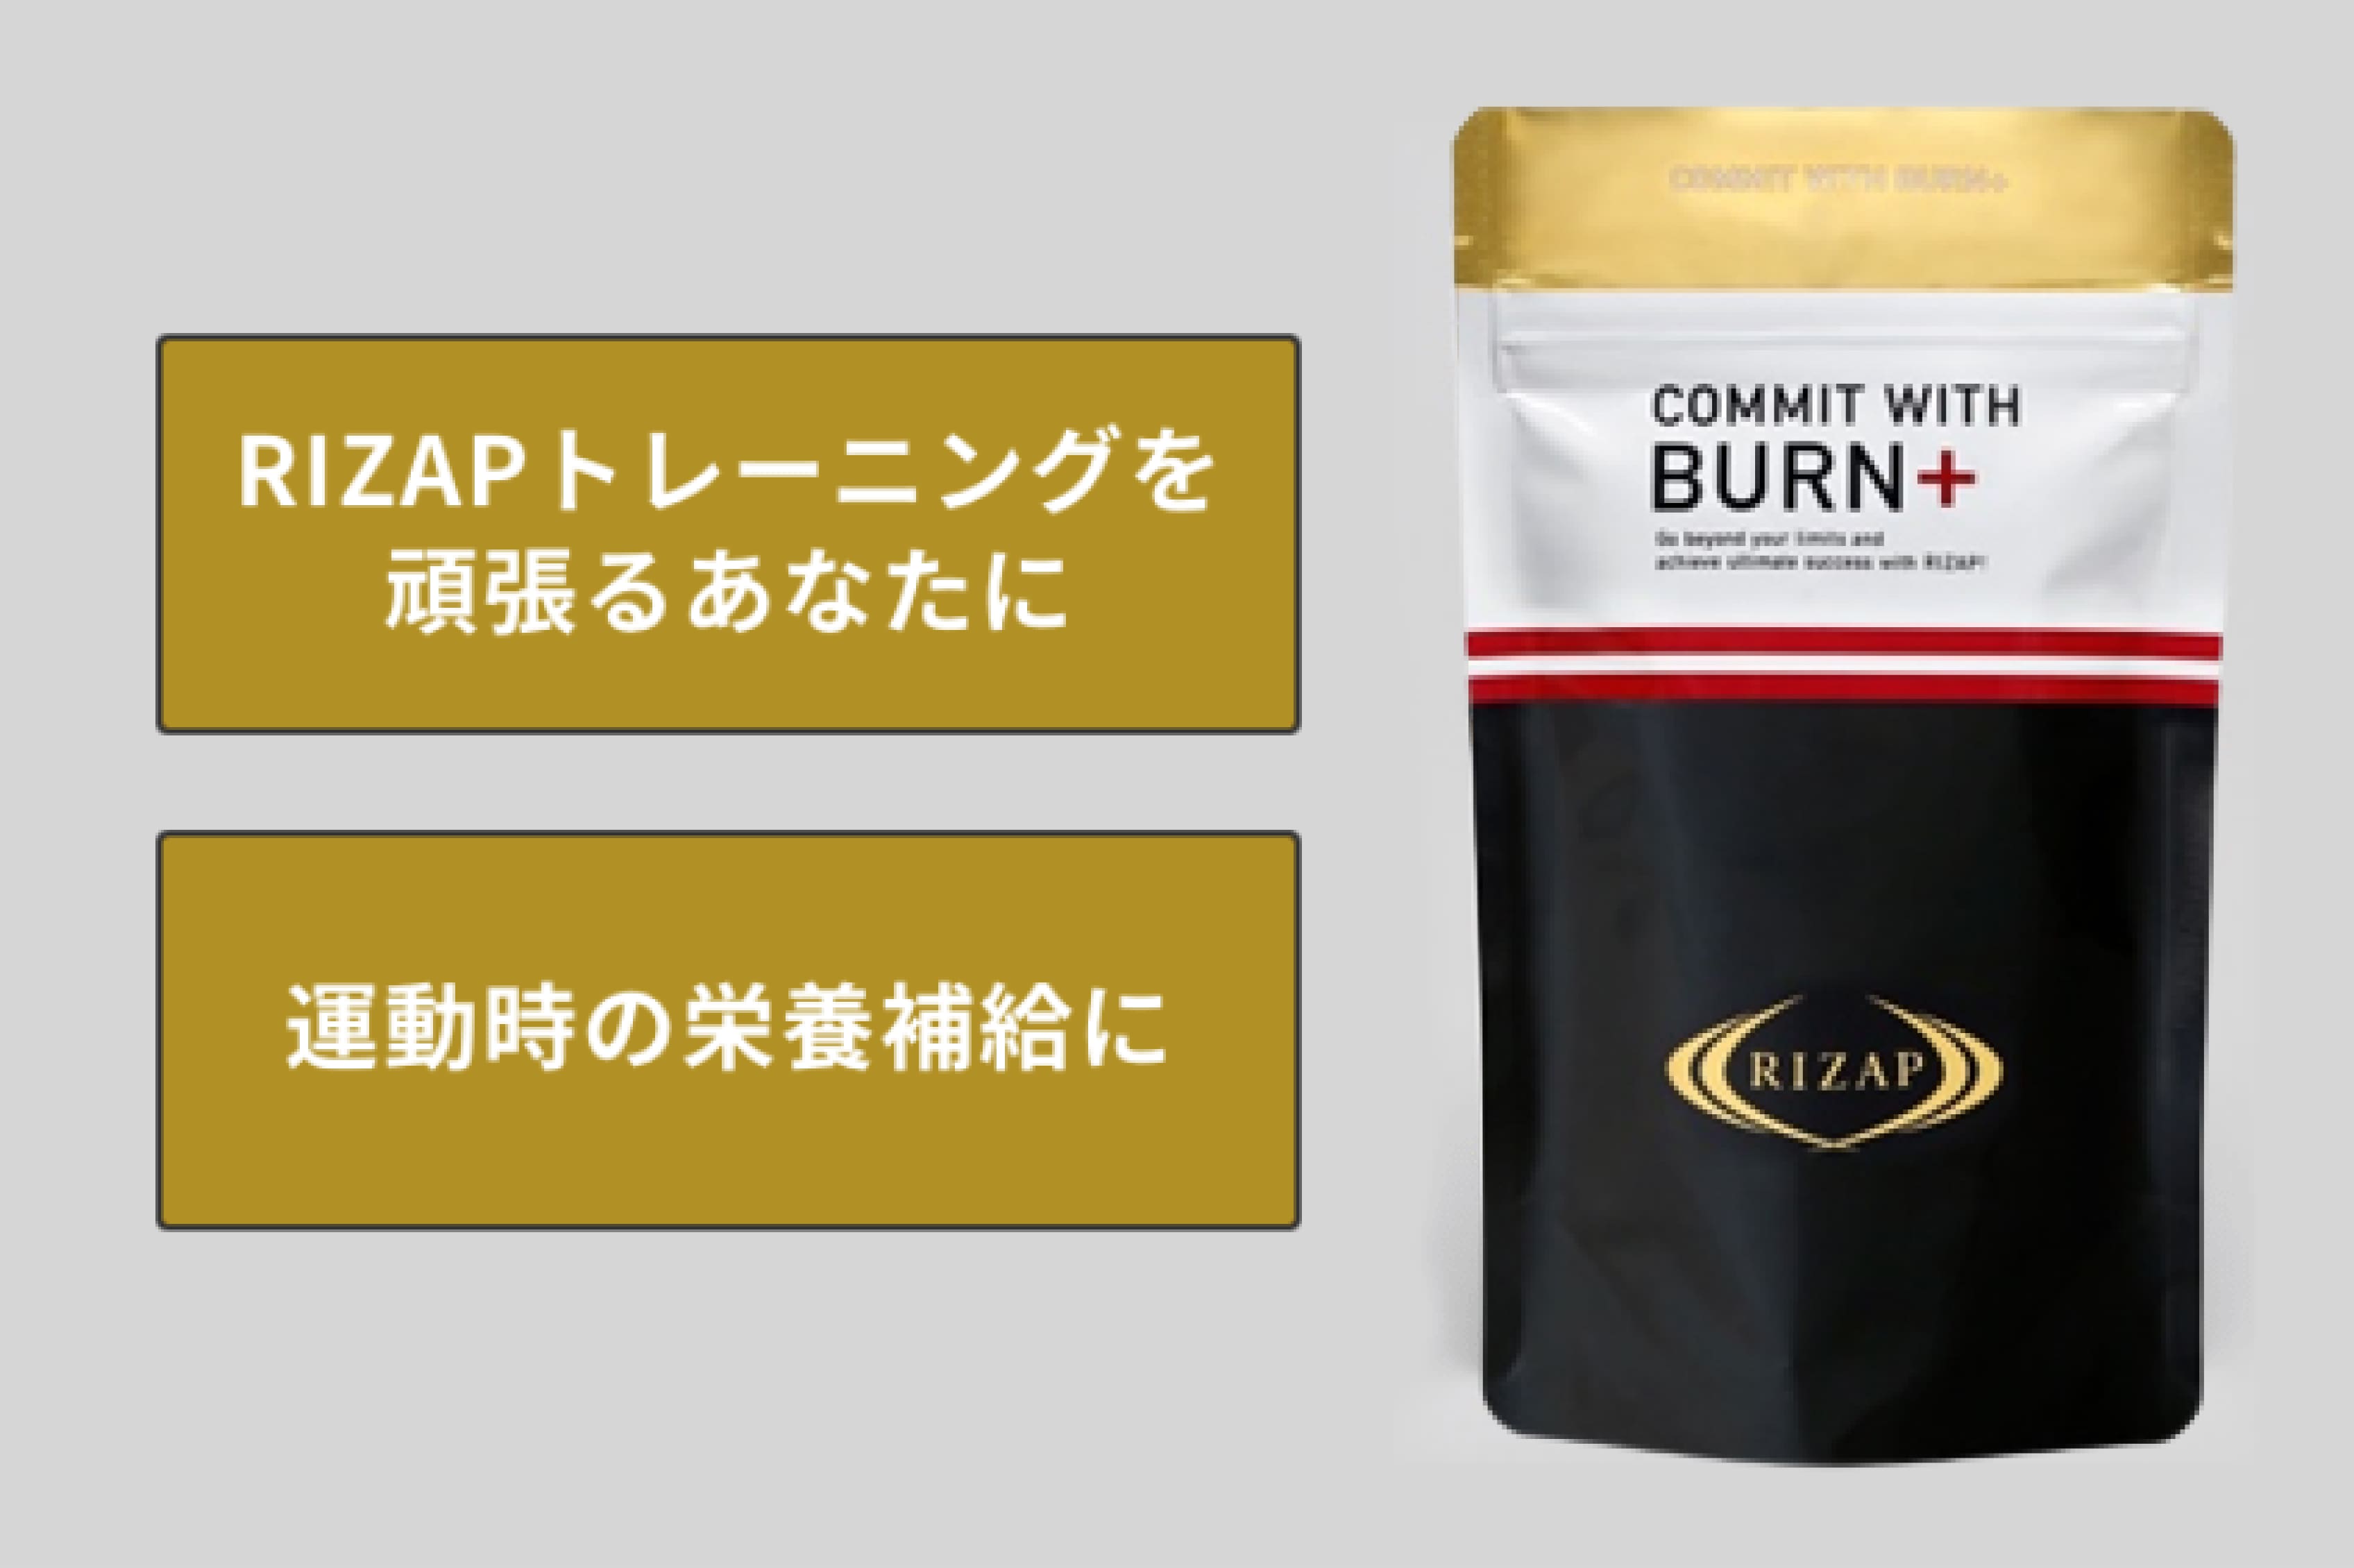 COMMIT WITH BURN+